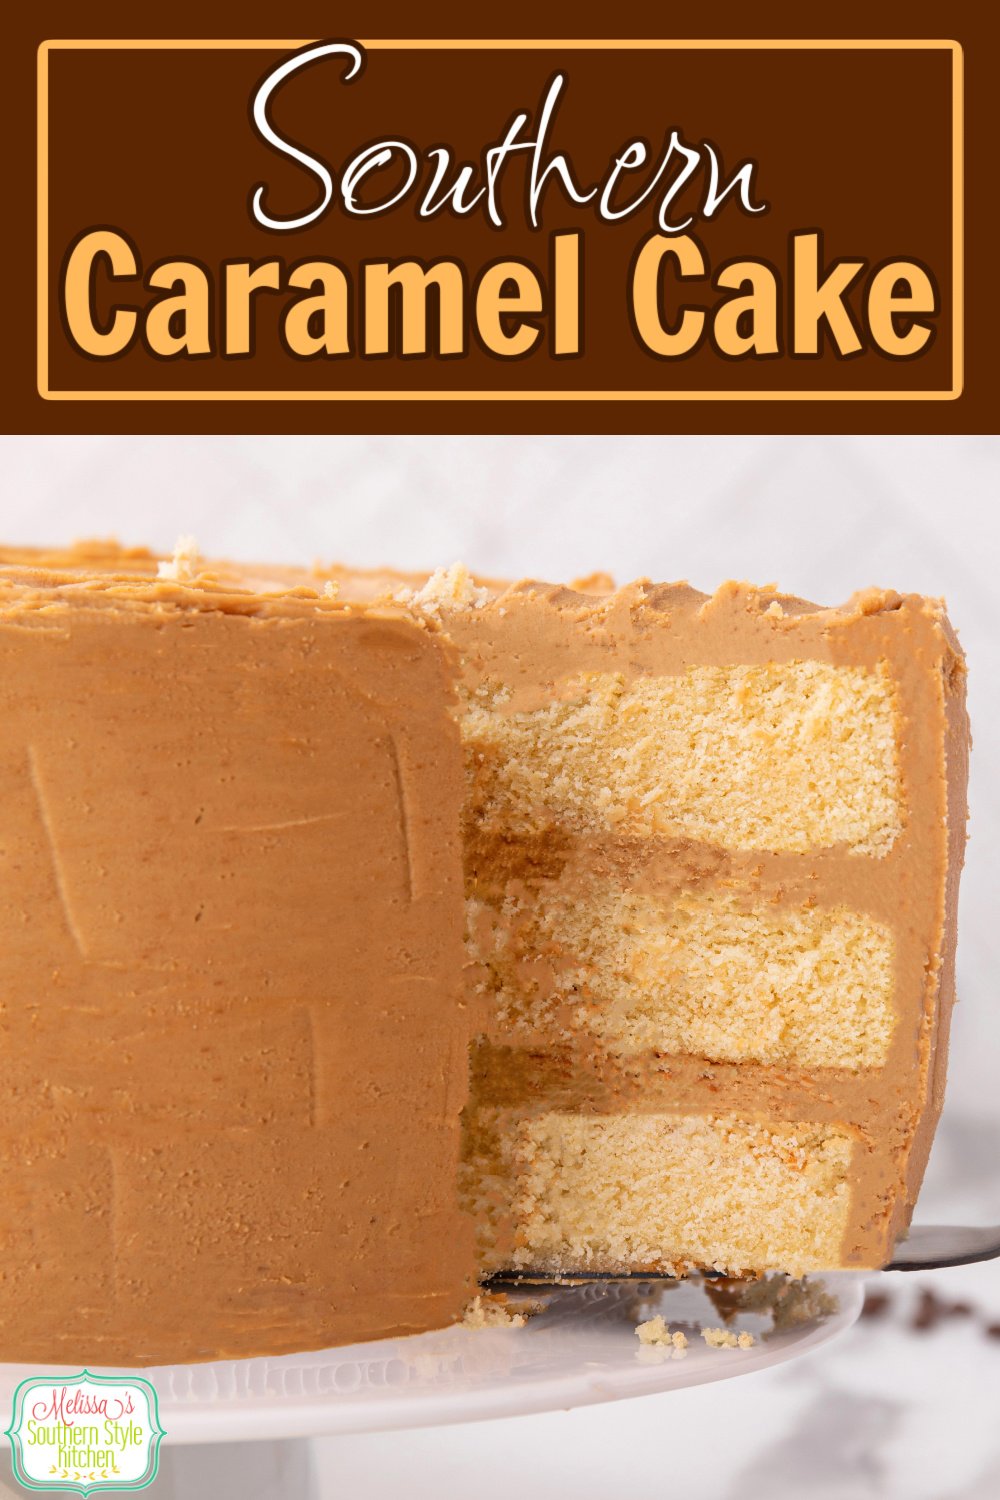 This buttery homemade Southern Caramel Cake features three cake layers frosted with a rich caramel frosting. #caramelcake #southerncaramelcake #cakes #cakerecipes #southerndesserts #carmamelfrosting #caramelicing via @melissasssk